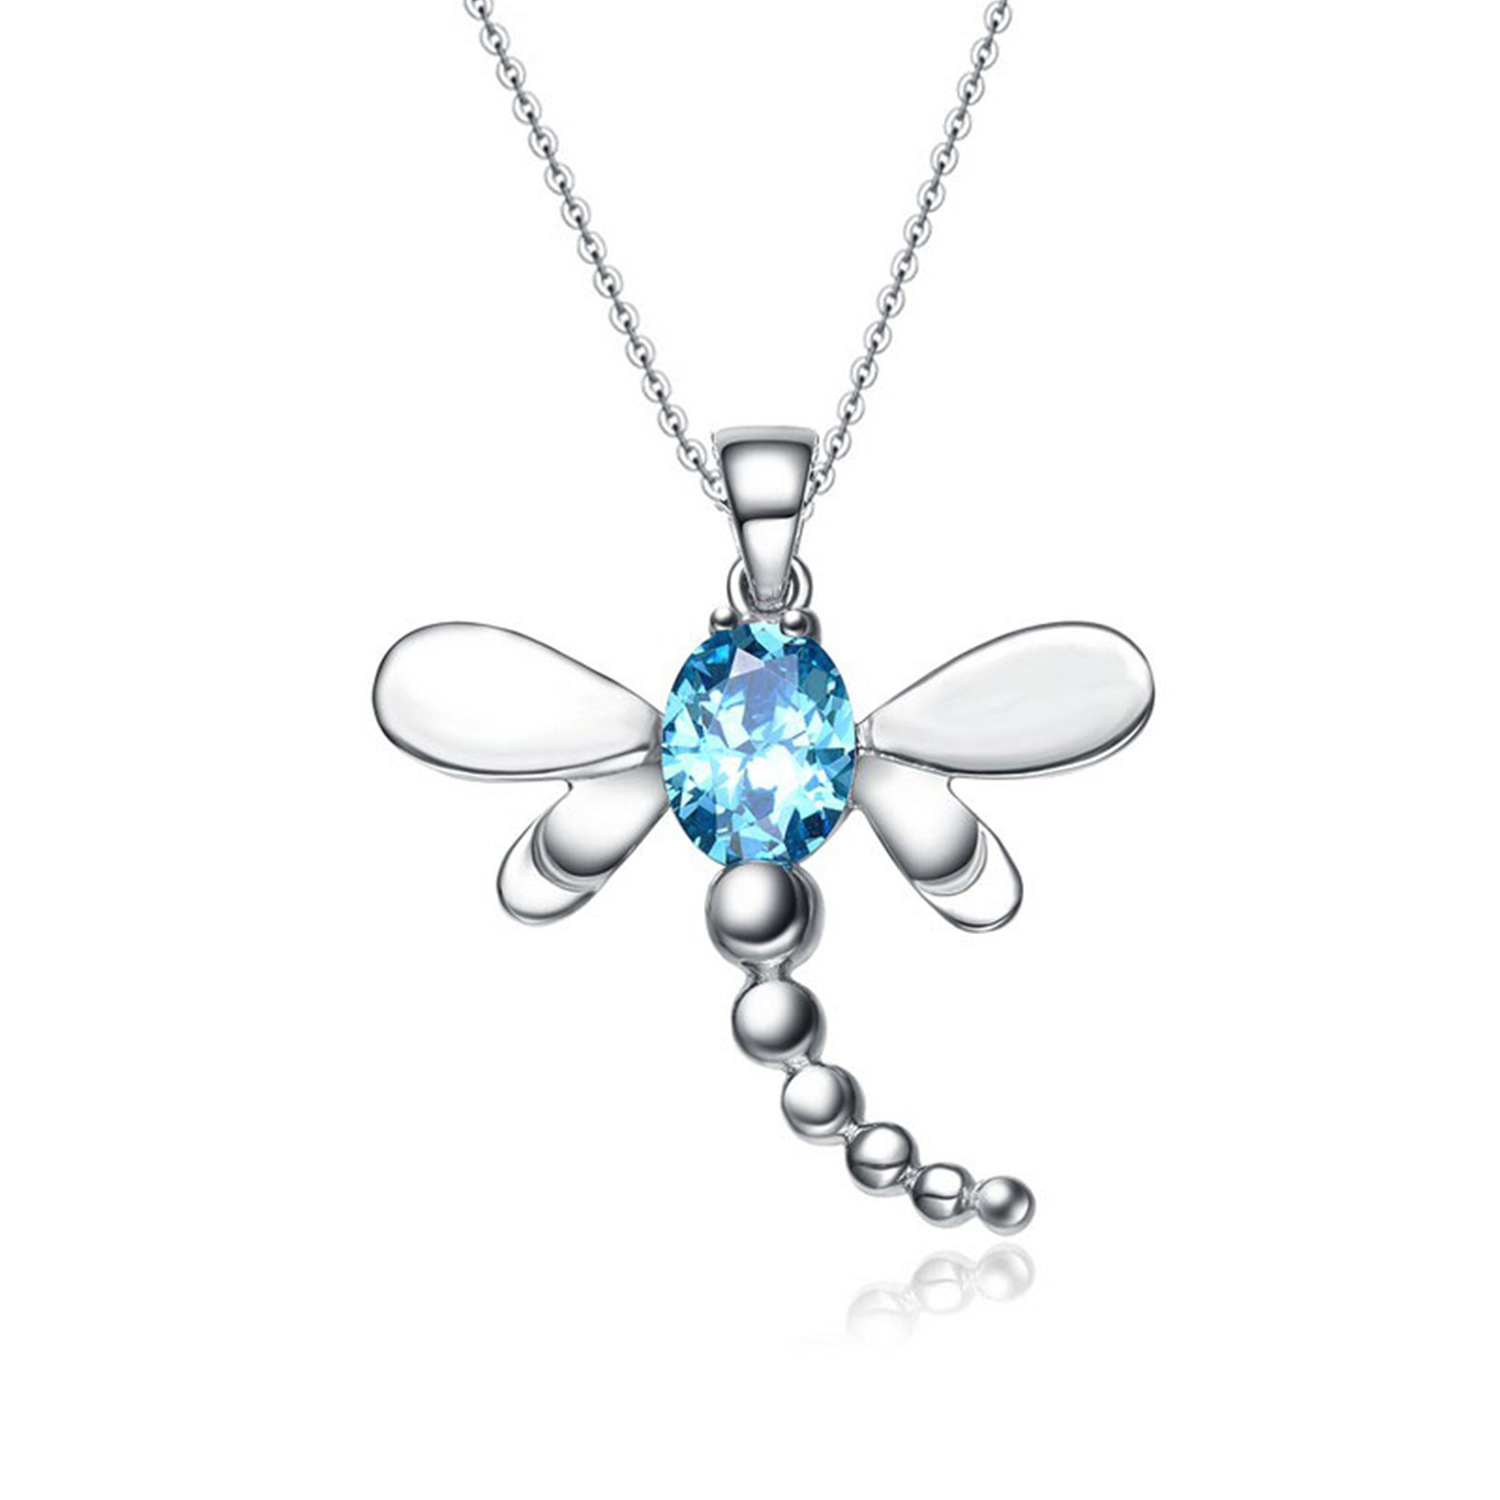 Wholesale Jewelry Necklace Women 925 Sterling Silver Cubic Zircon Dragonfly Cute Pendant Necklace(图3)